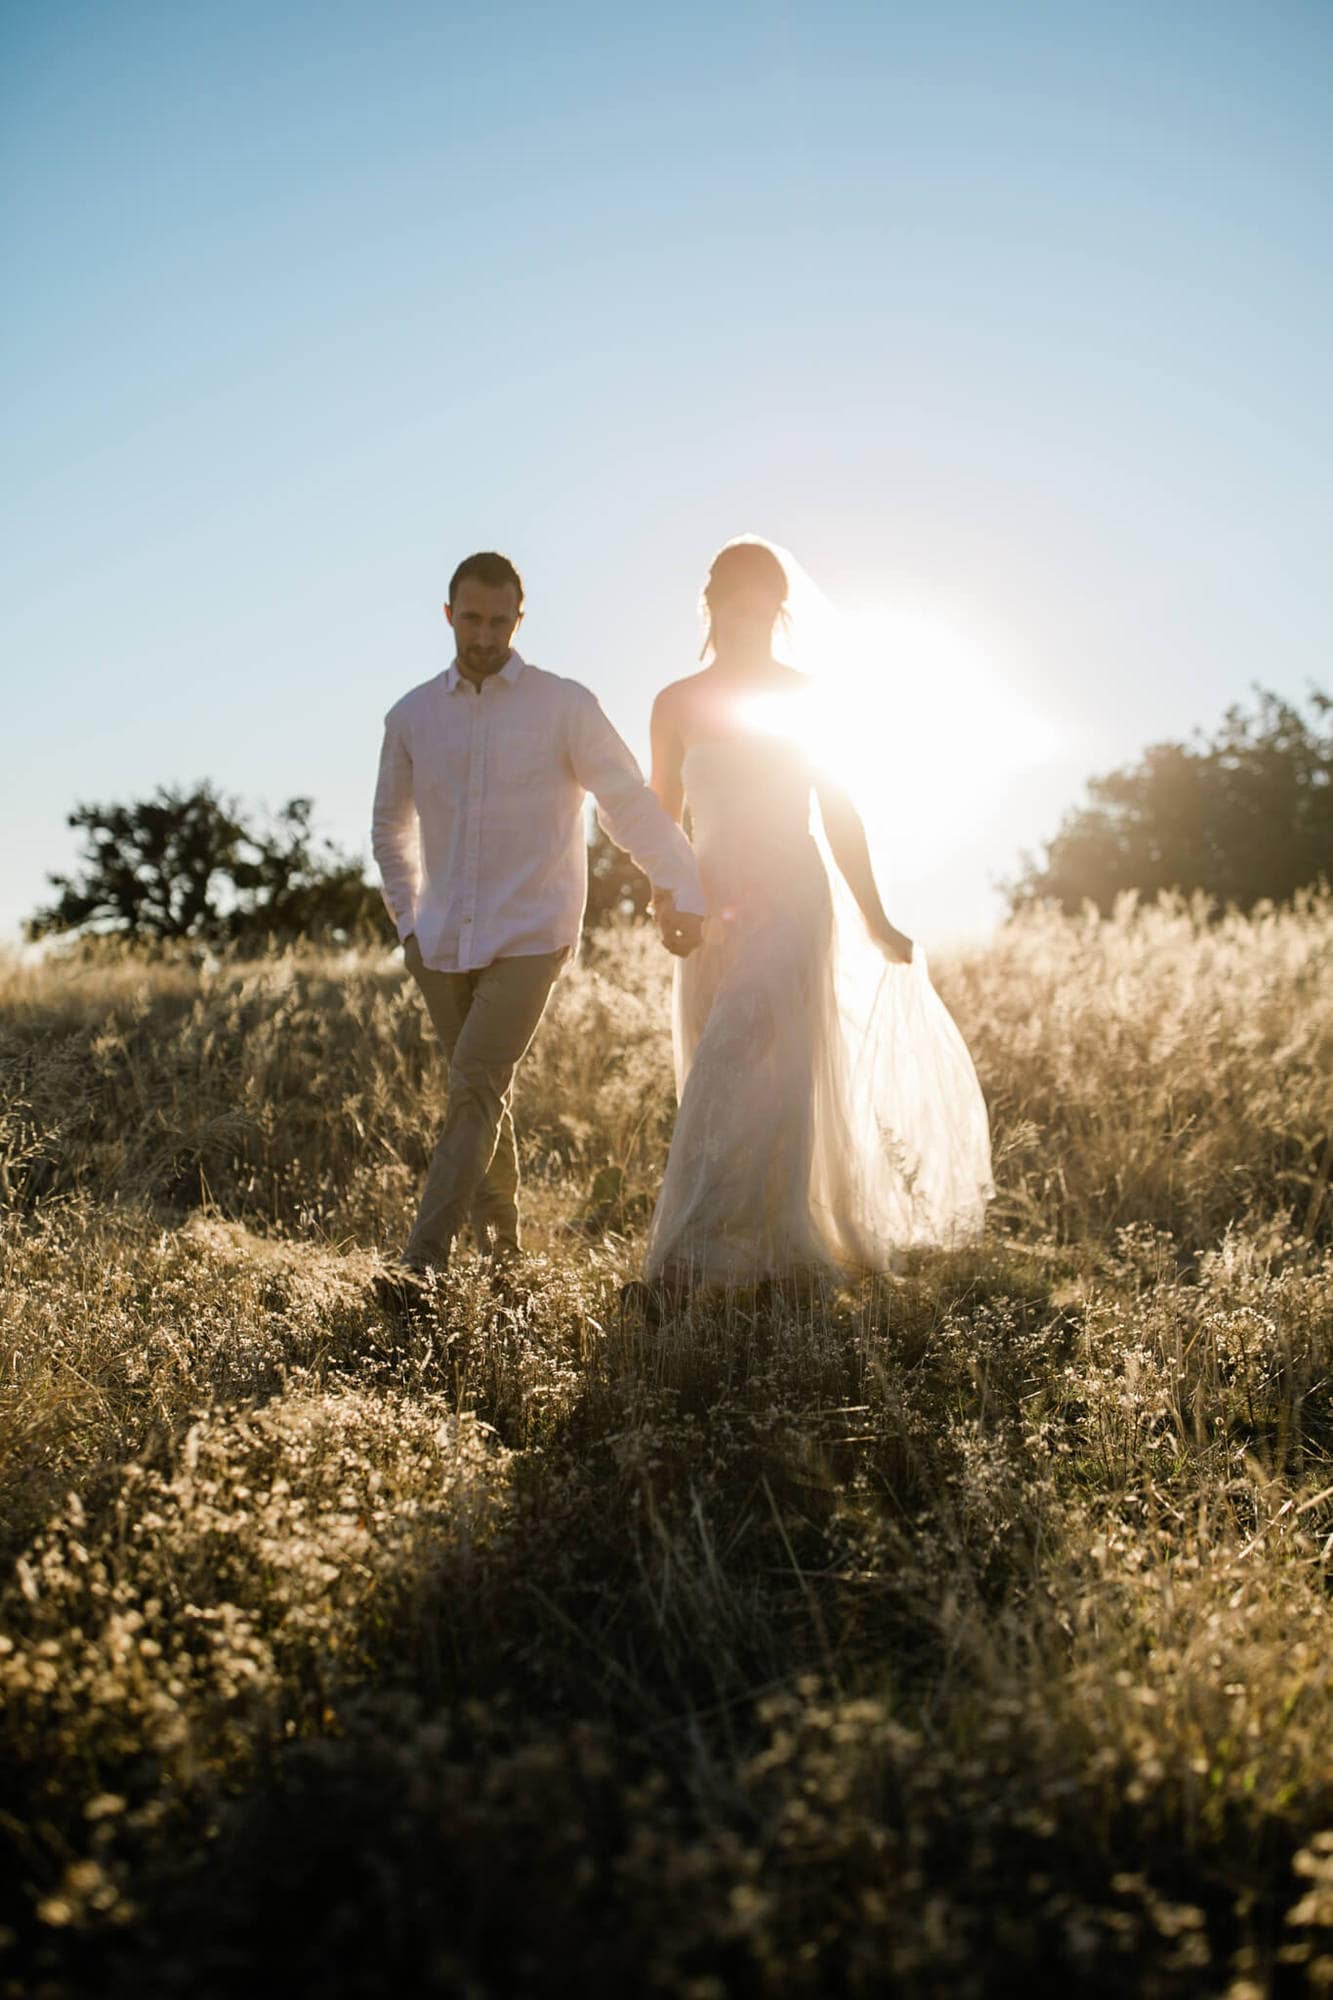 Silhouetted by the bright sun behind them, the bride and groom walk through tall dried grass.